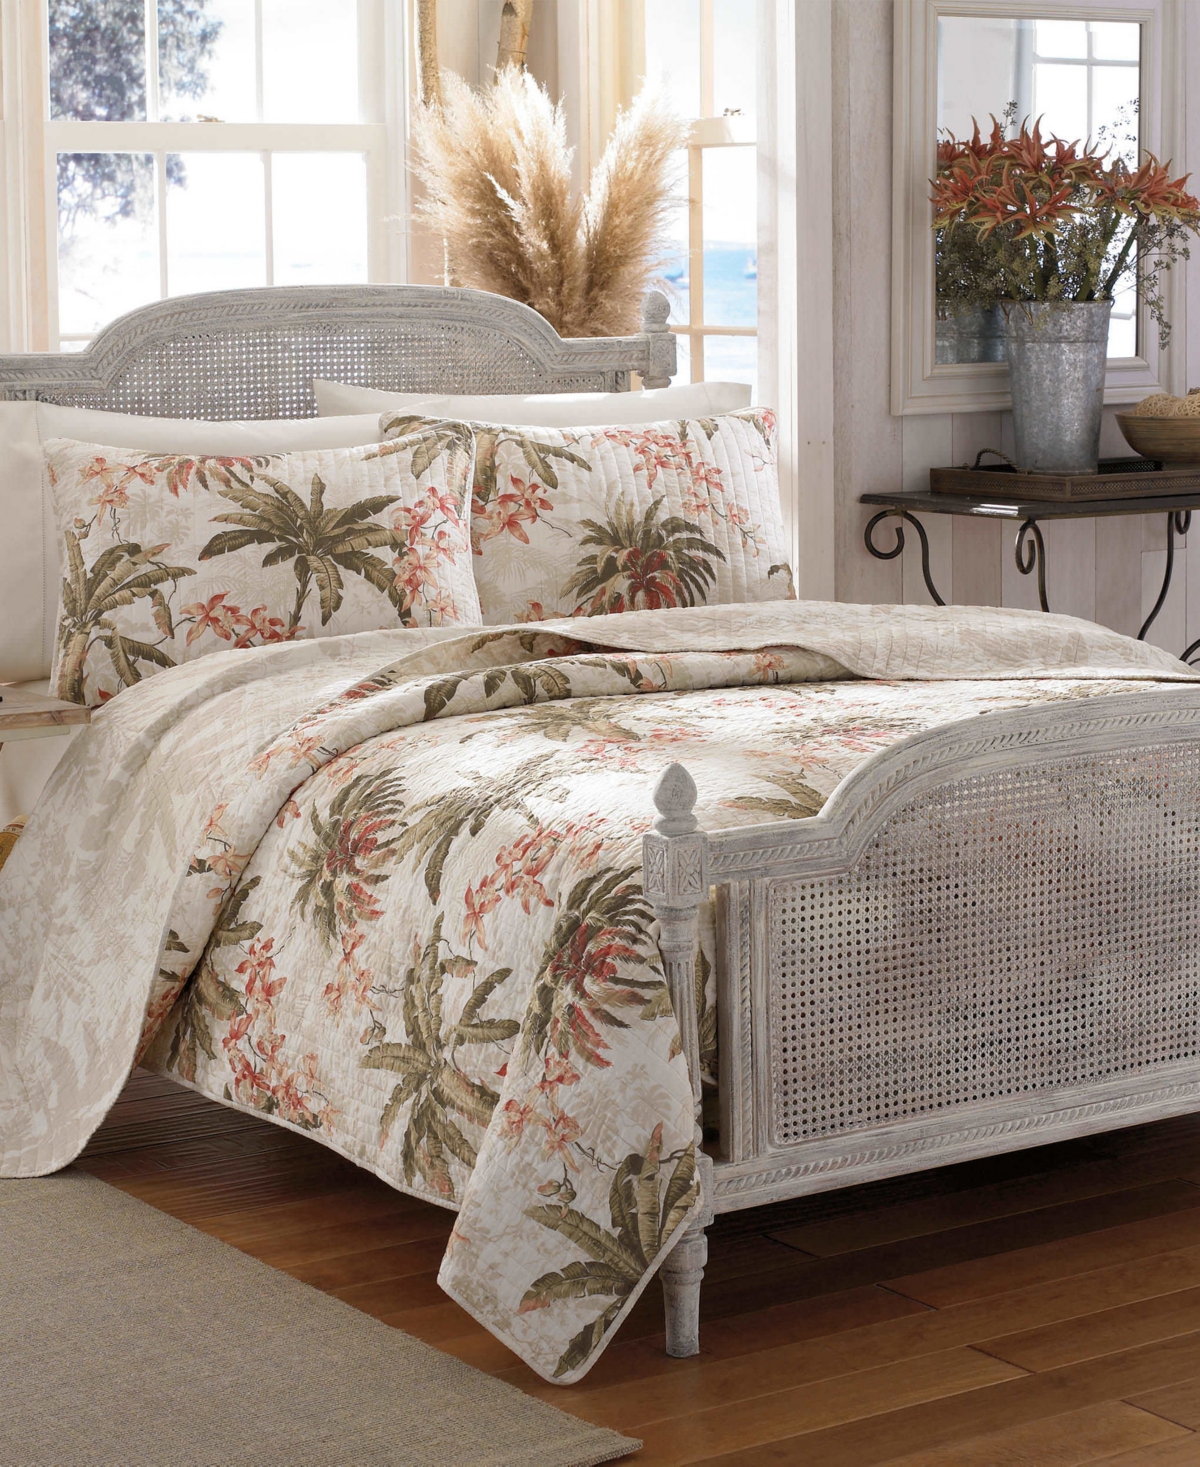 TOMMY BAHAMA HOME TOMMY BAHAMA BONNY COVE WHITE REVERSIBLE 3-PIECE FULL/QUEEN QUILT SET BEDDING